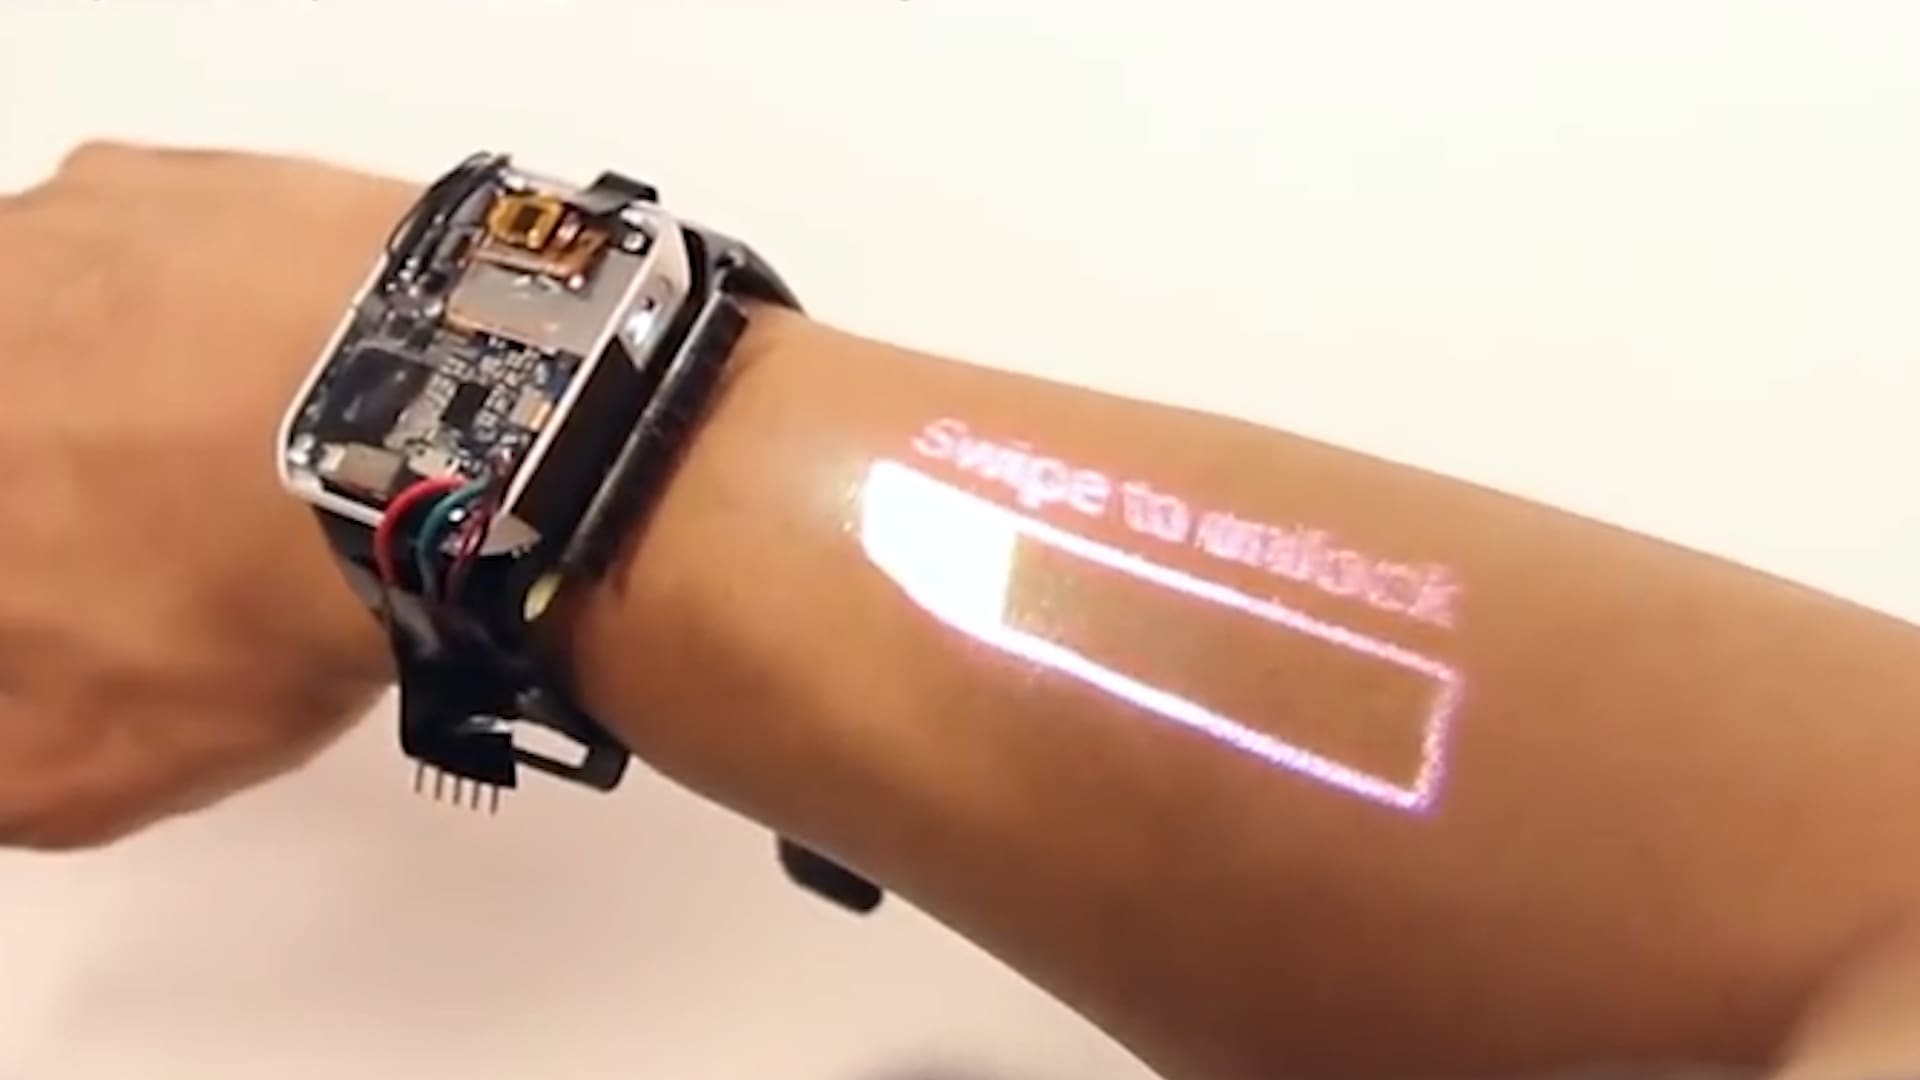 Min Tillid morder LumiWatch uses built-in projector to turn your arm into a touchscreen